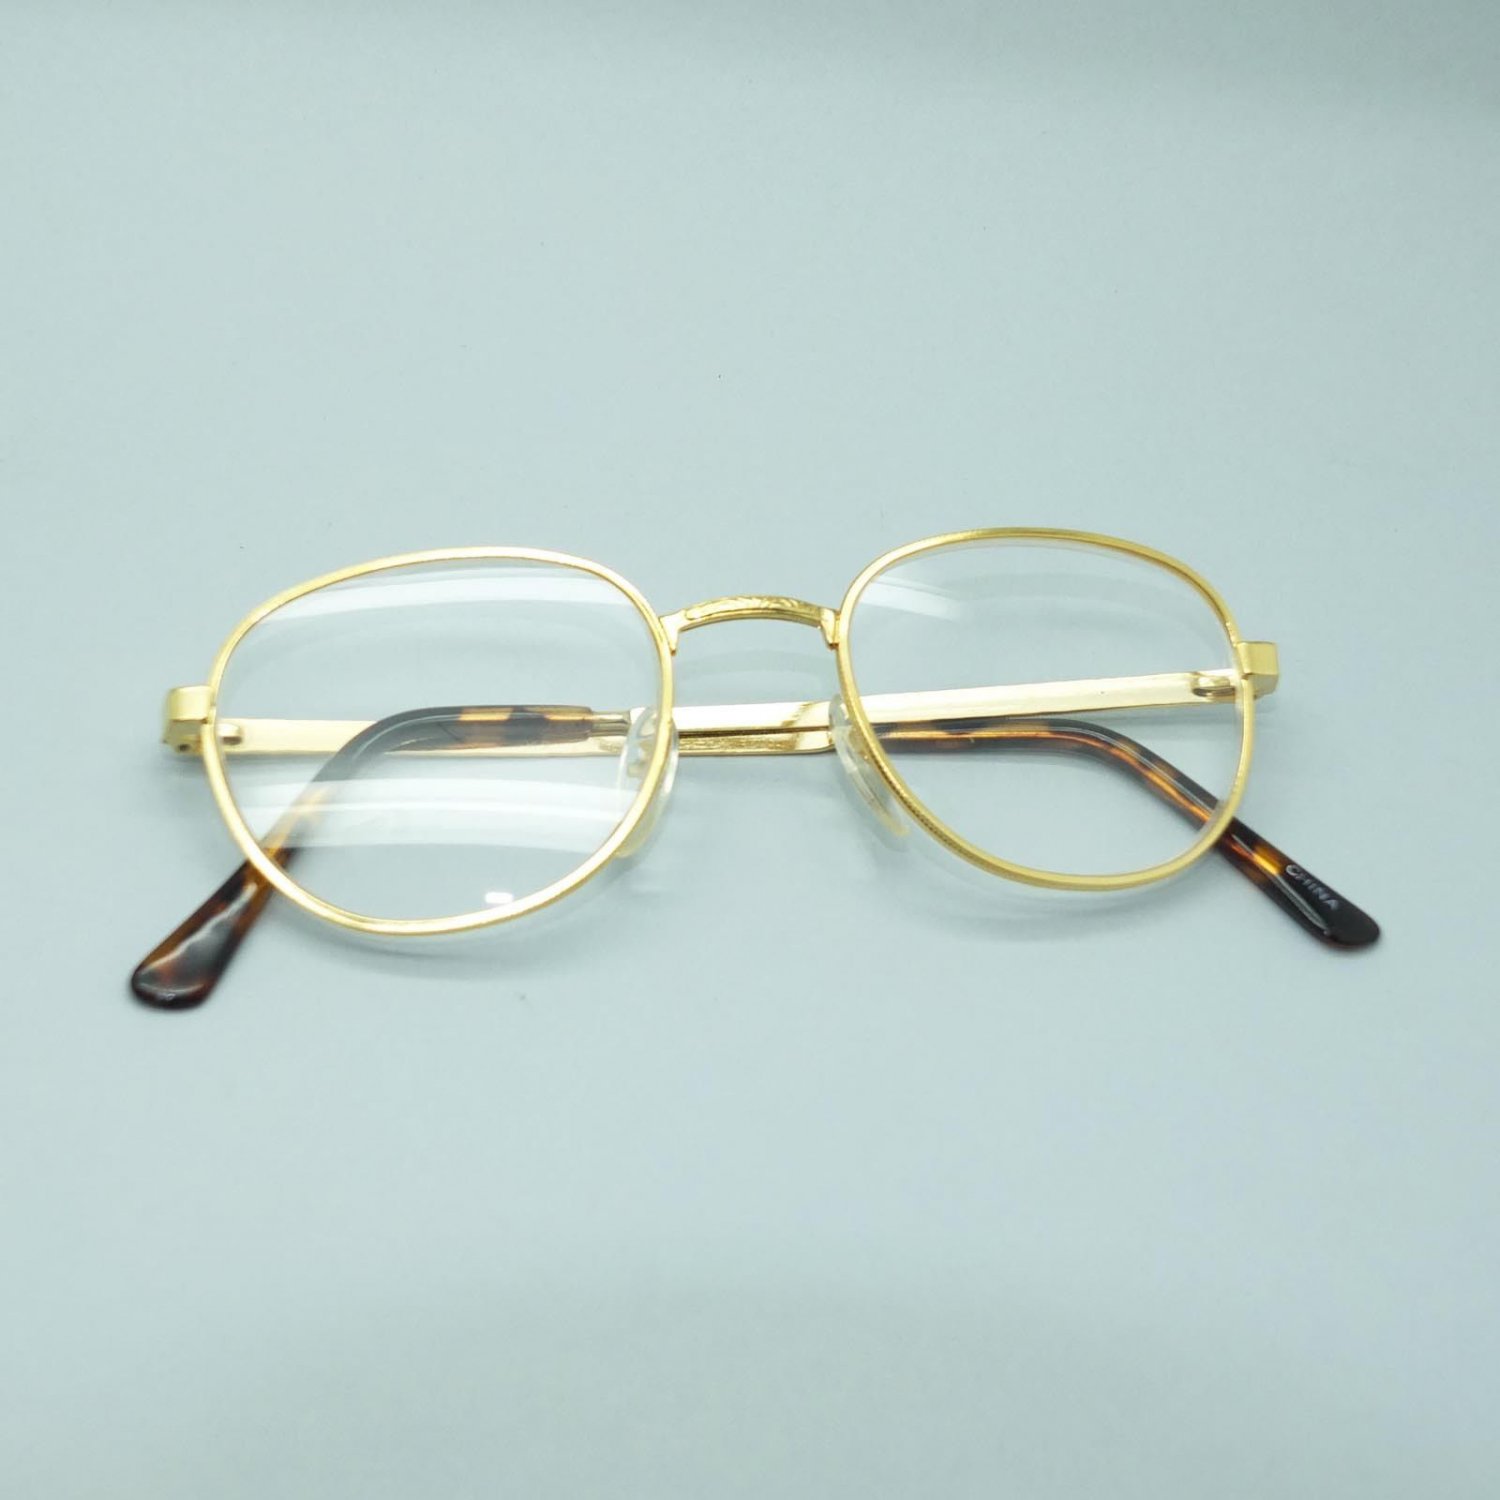 Classic Metal Rounded Frame Reading Glasses Gold Wire +3.75 Lens Strength